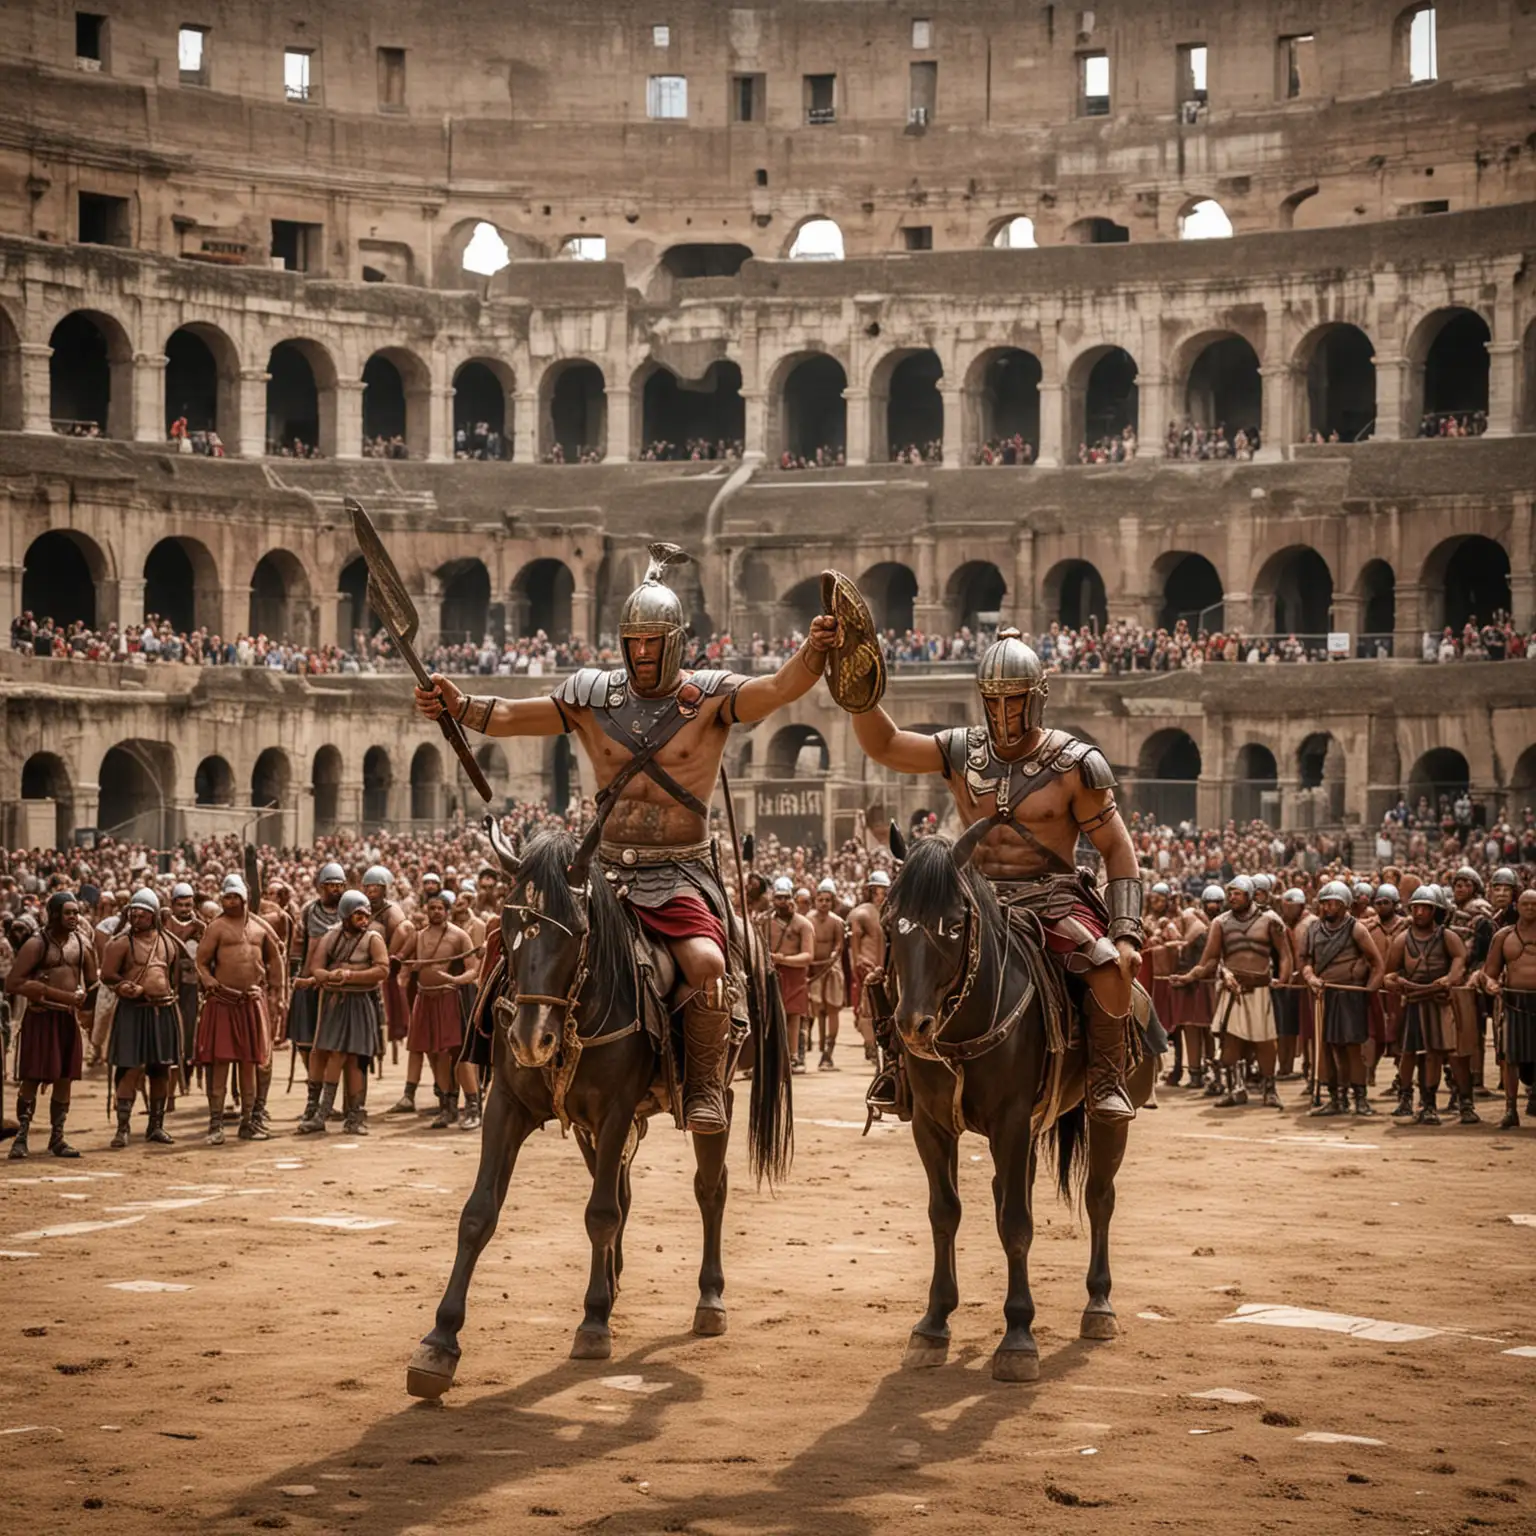 In the heart of Rome, cheers from the crowd echoed in the Colosseum when gladiators would fight each other. Do you know that those who fought were never slaves? Some warriors came here for their name and fortune.